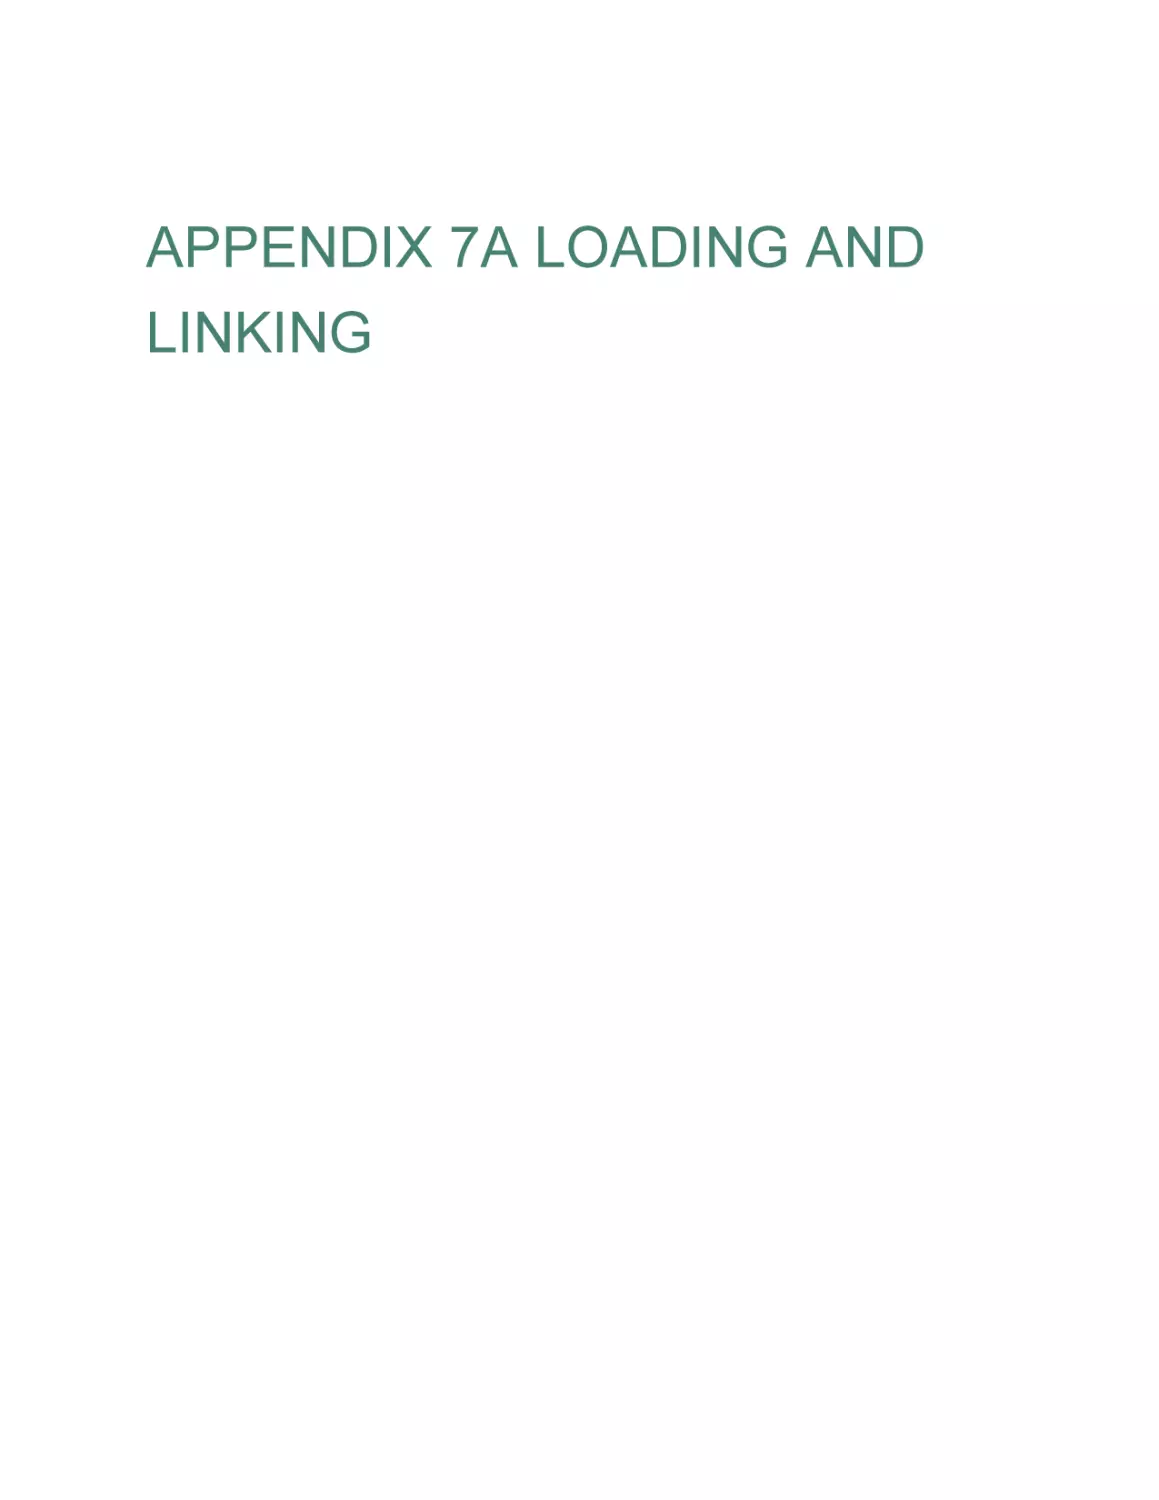 APPENDIX 7A LOADING AND LINKING